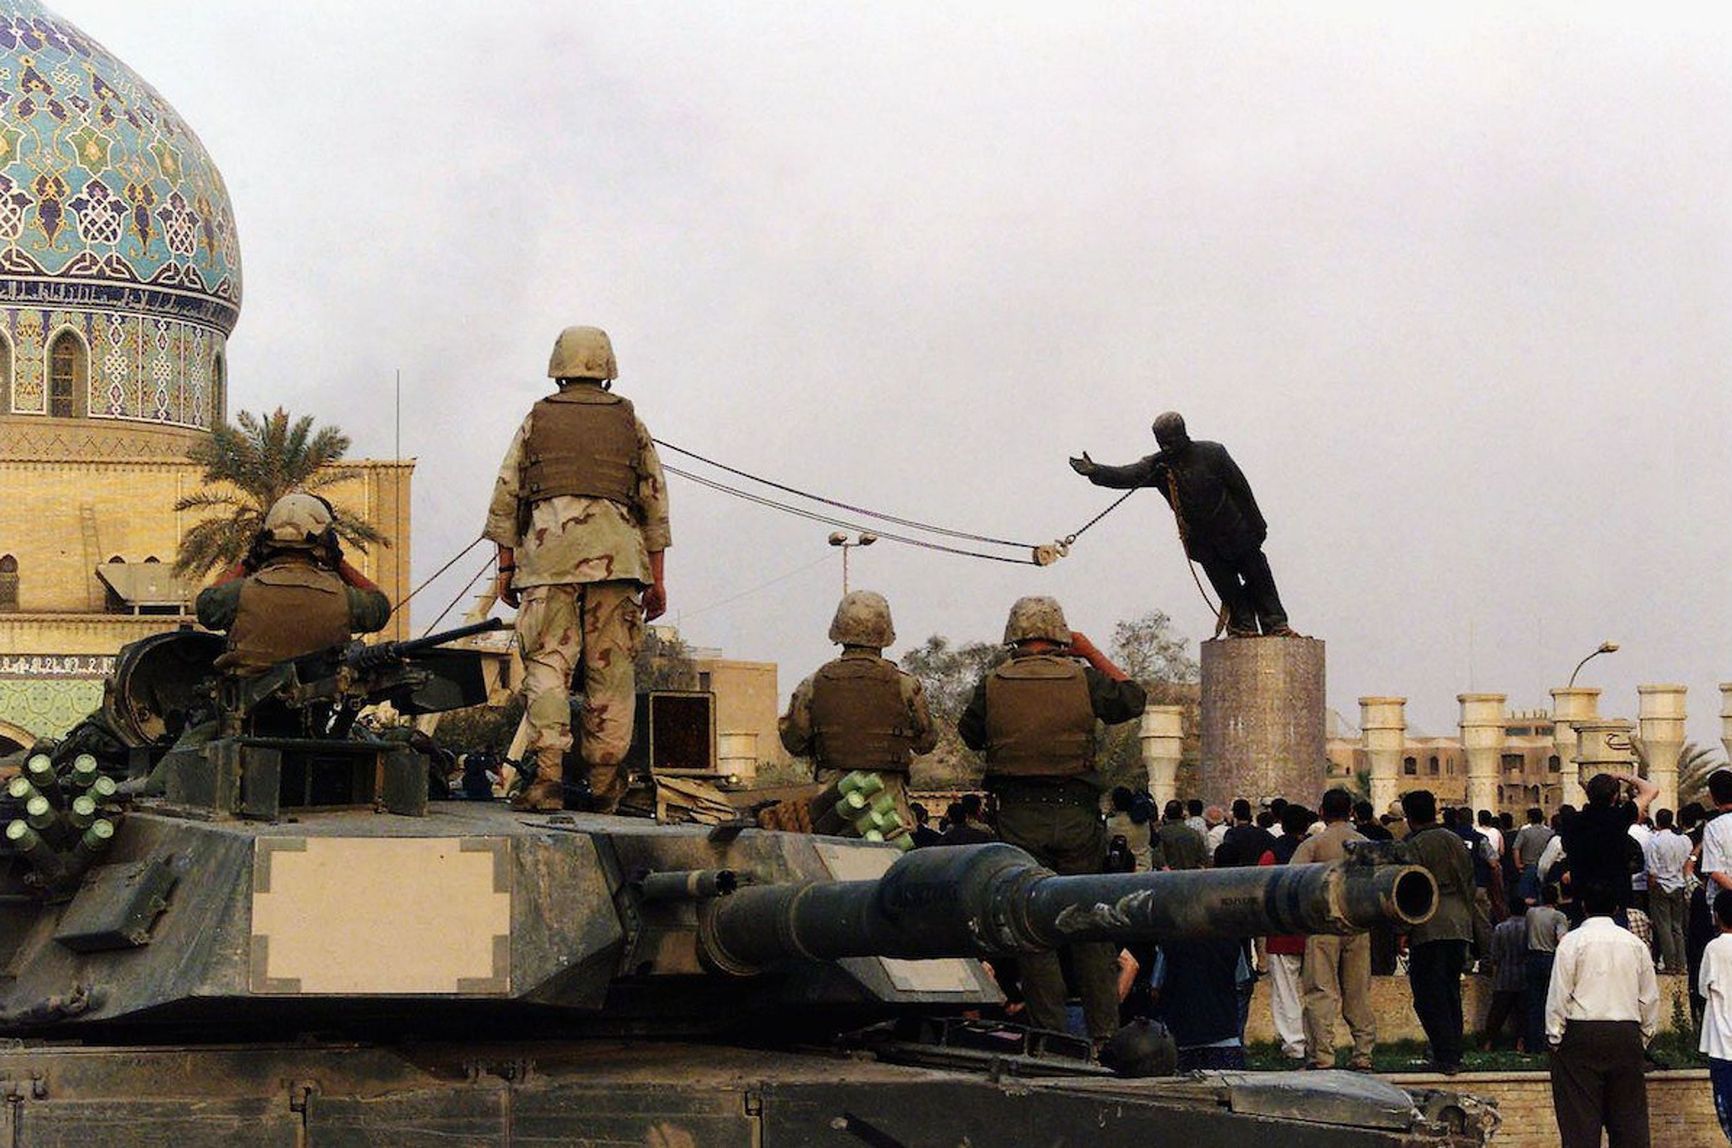 American soldiers watch the demolition of Saddam Hussein's monument in Baghdad, April 9, 2003 